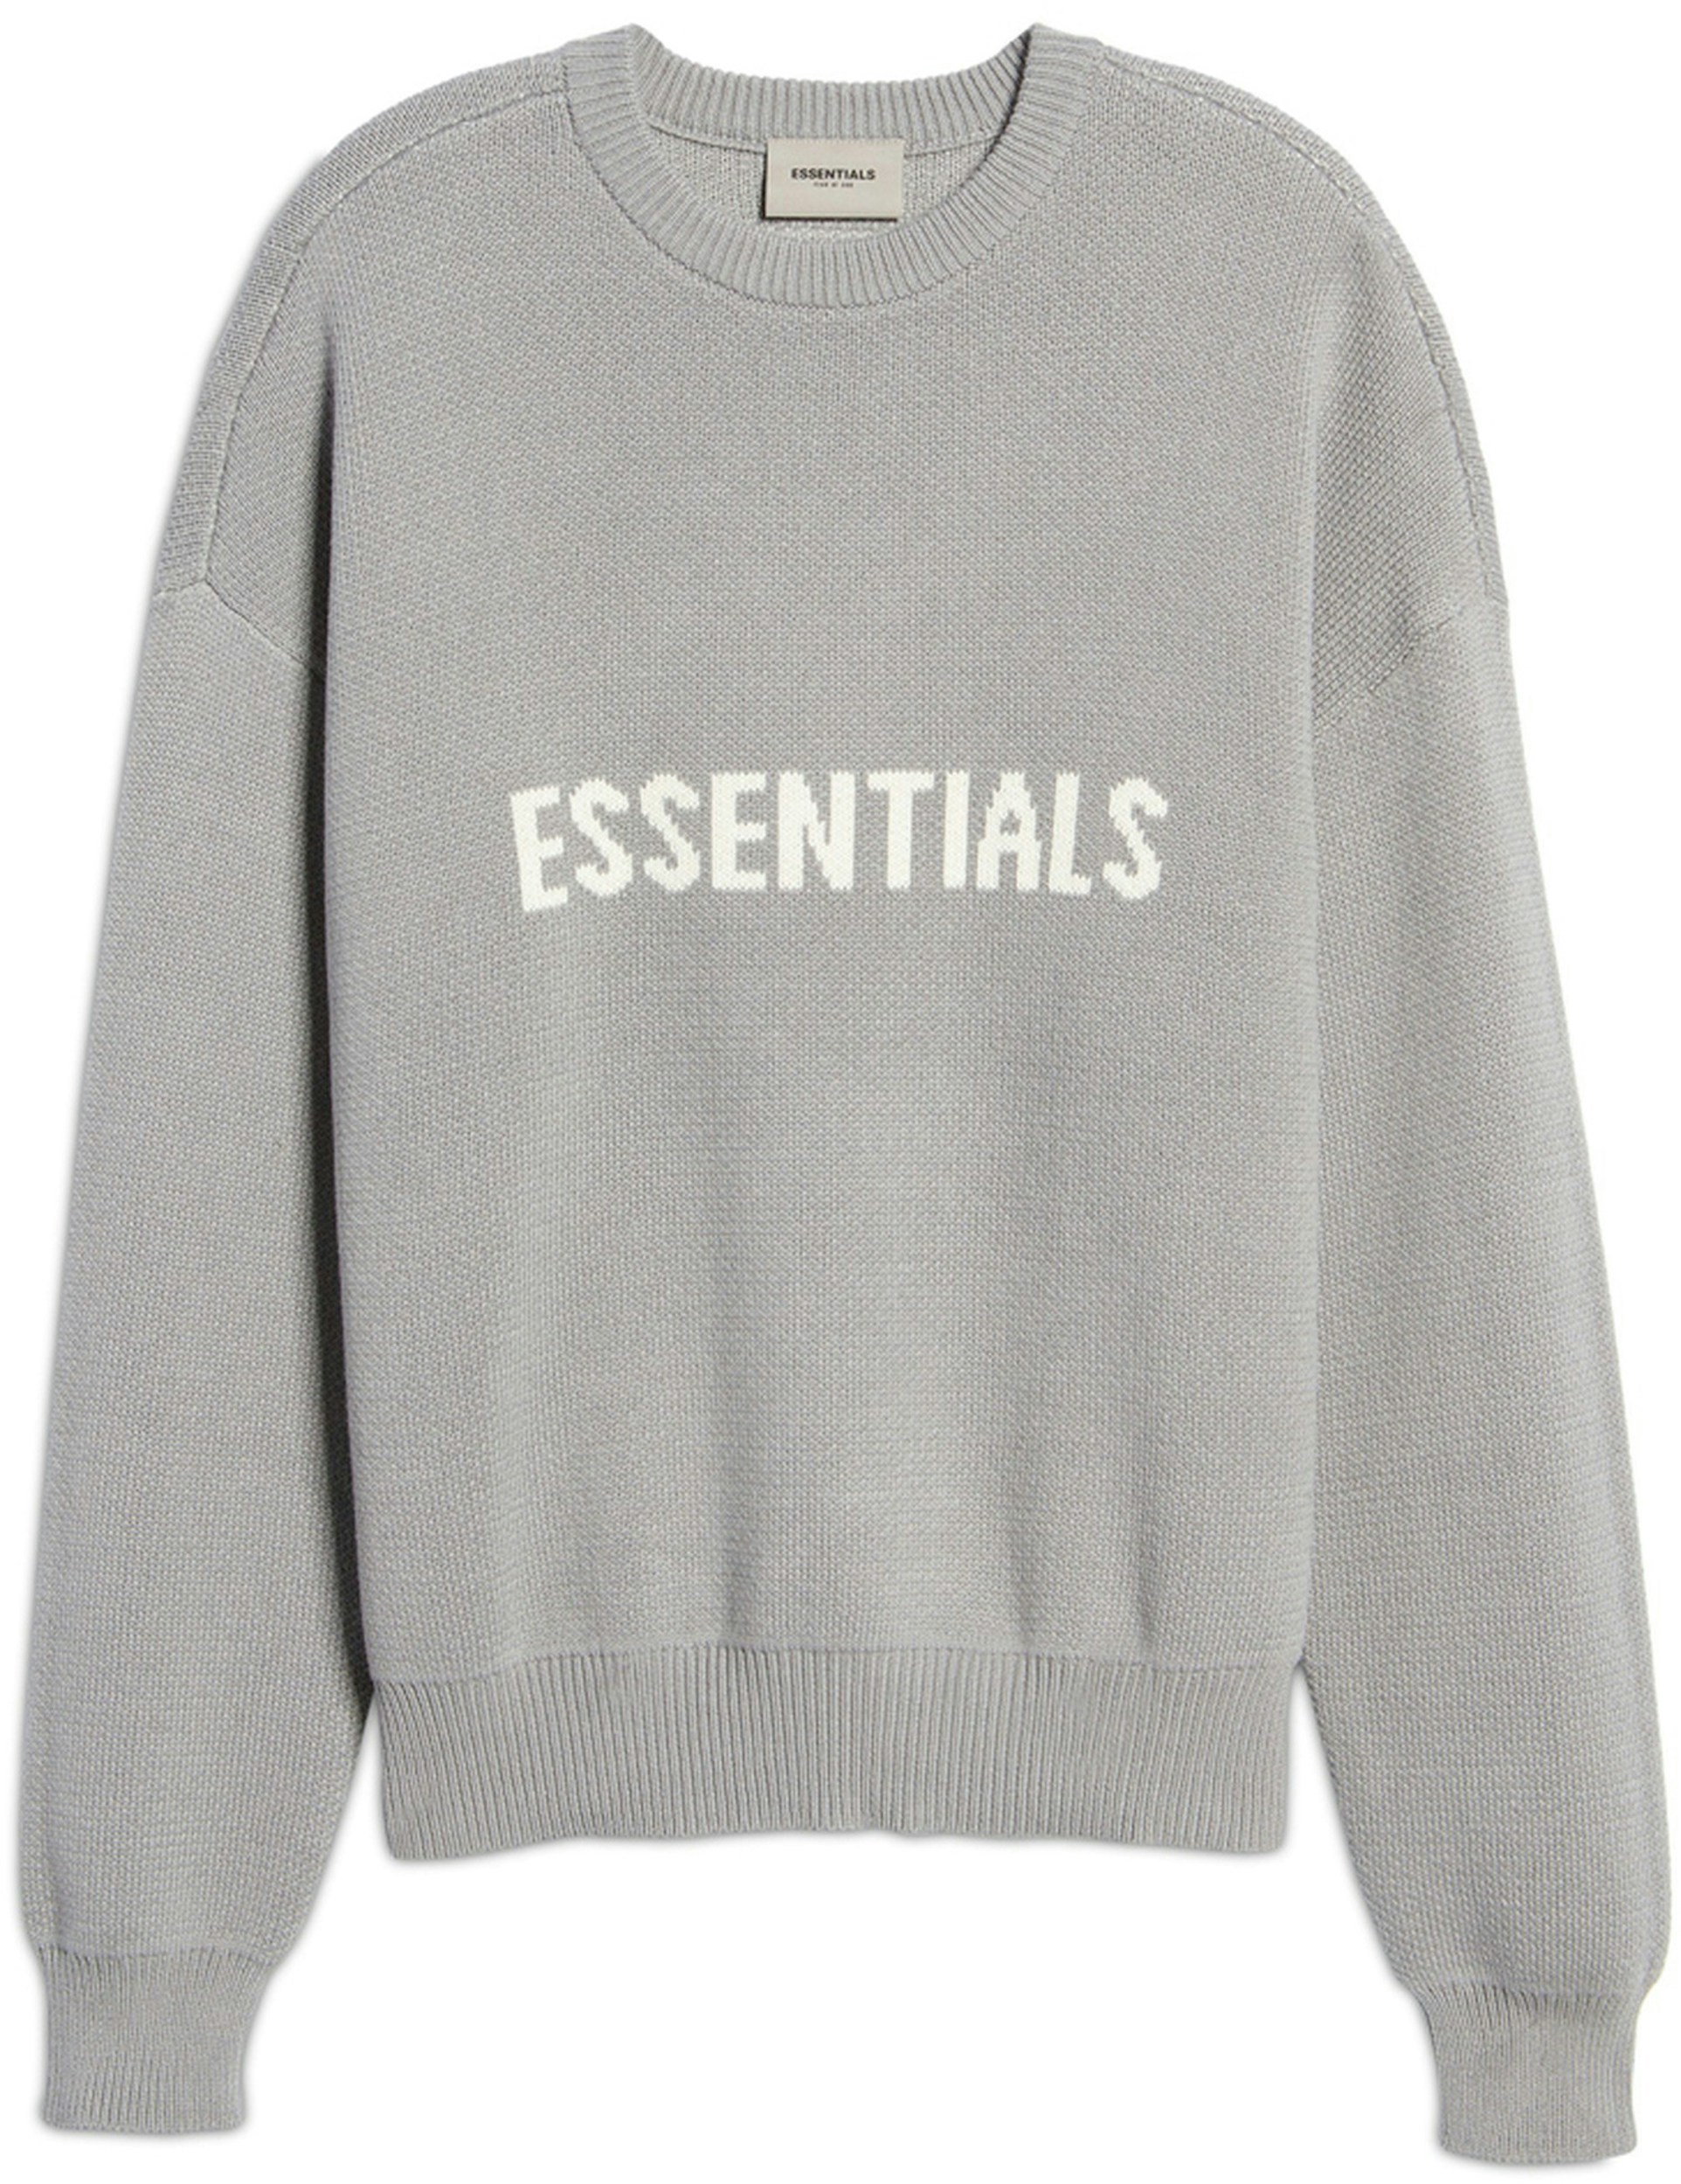 FEAR OF GOD ESSENTIALS Knit Sweater Cement/Pebble - SS21